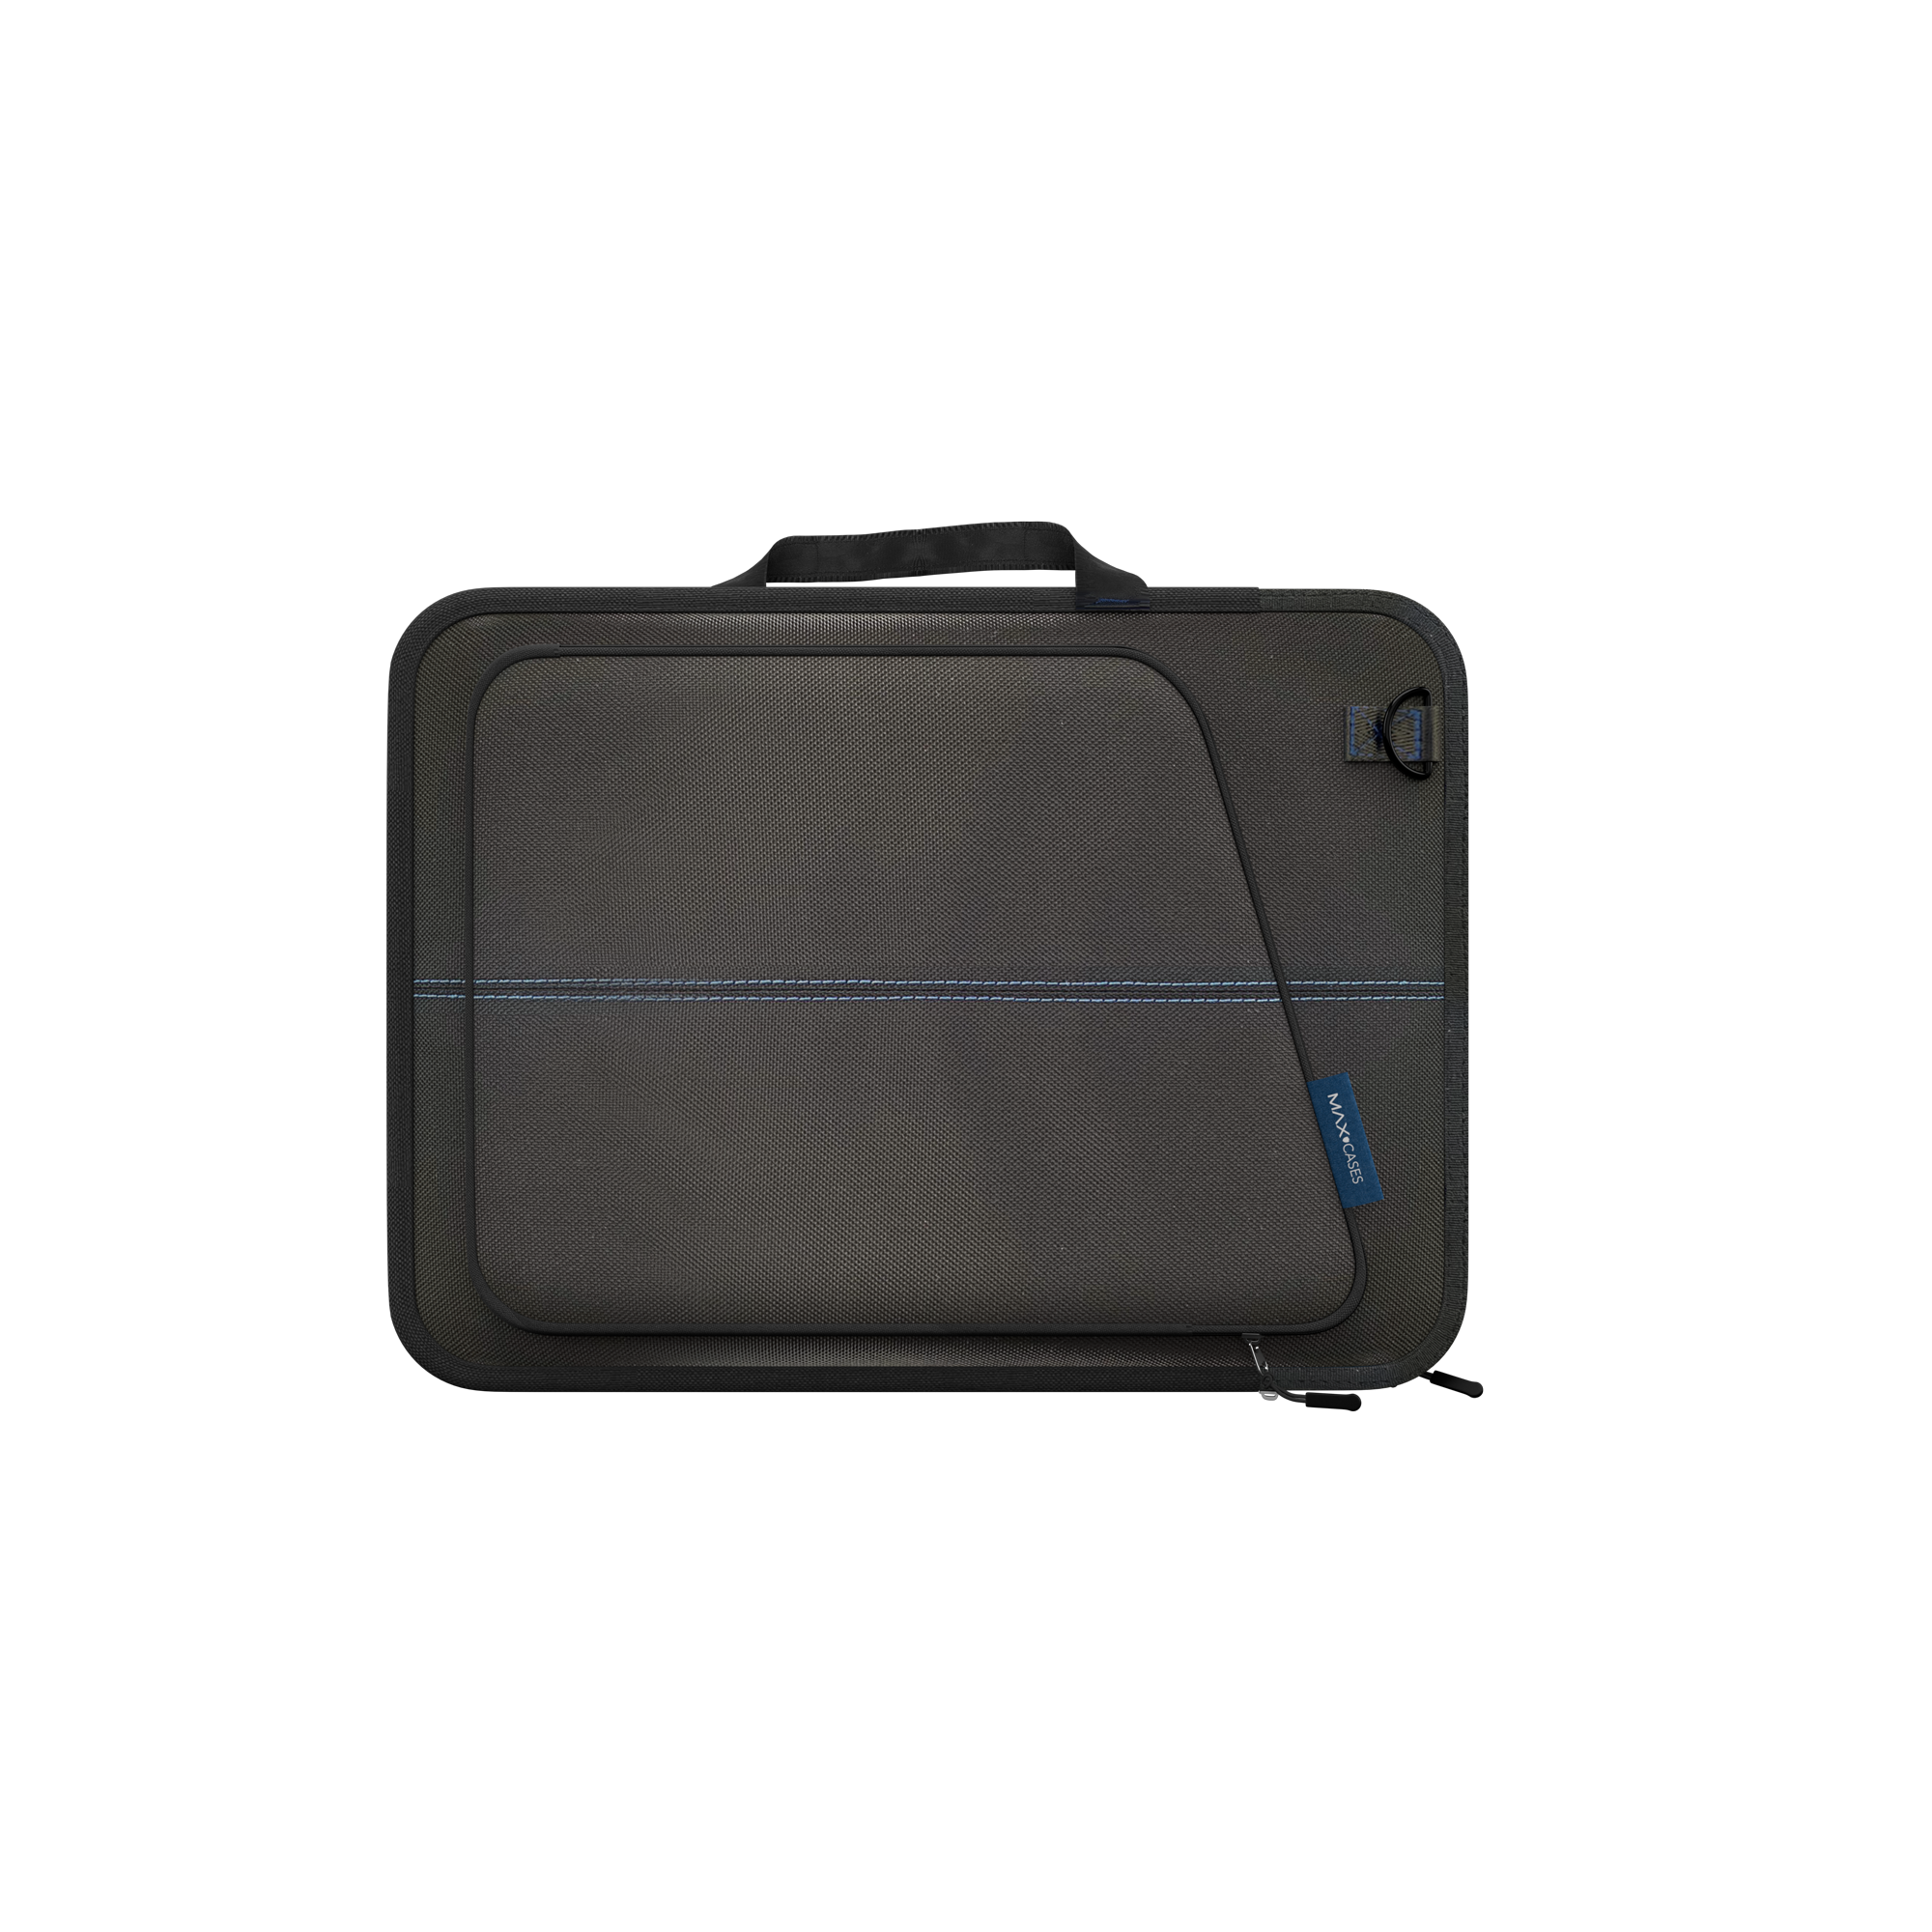 https://www.maxcases.com/admin/_products/200_Maxcase_Slim_Sleeve_with_Pocket3_Complete_Pic1_Alpha.png